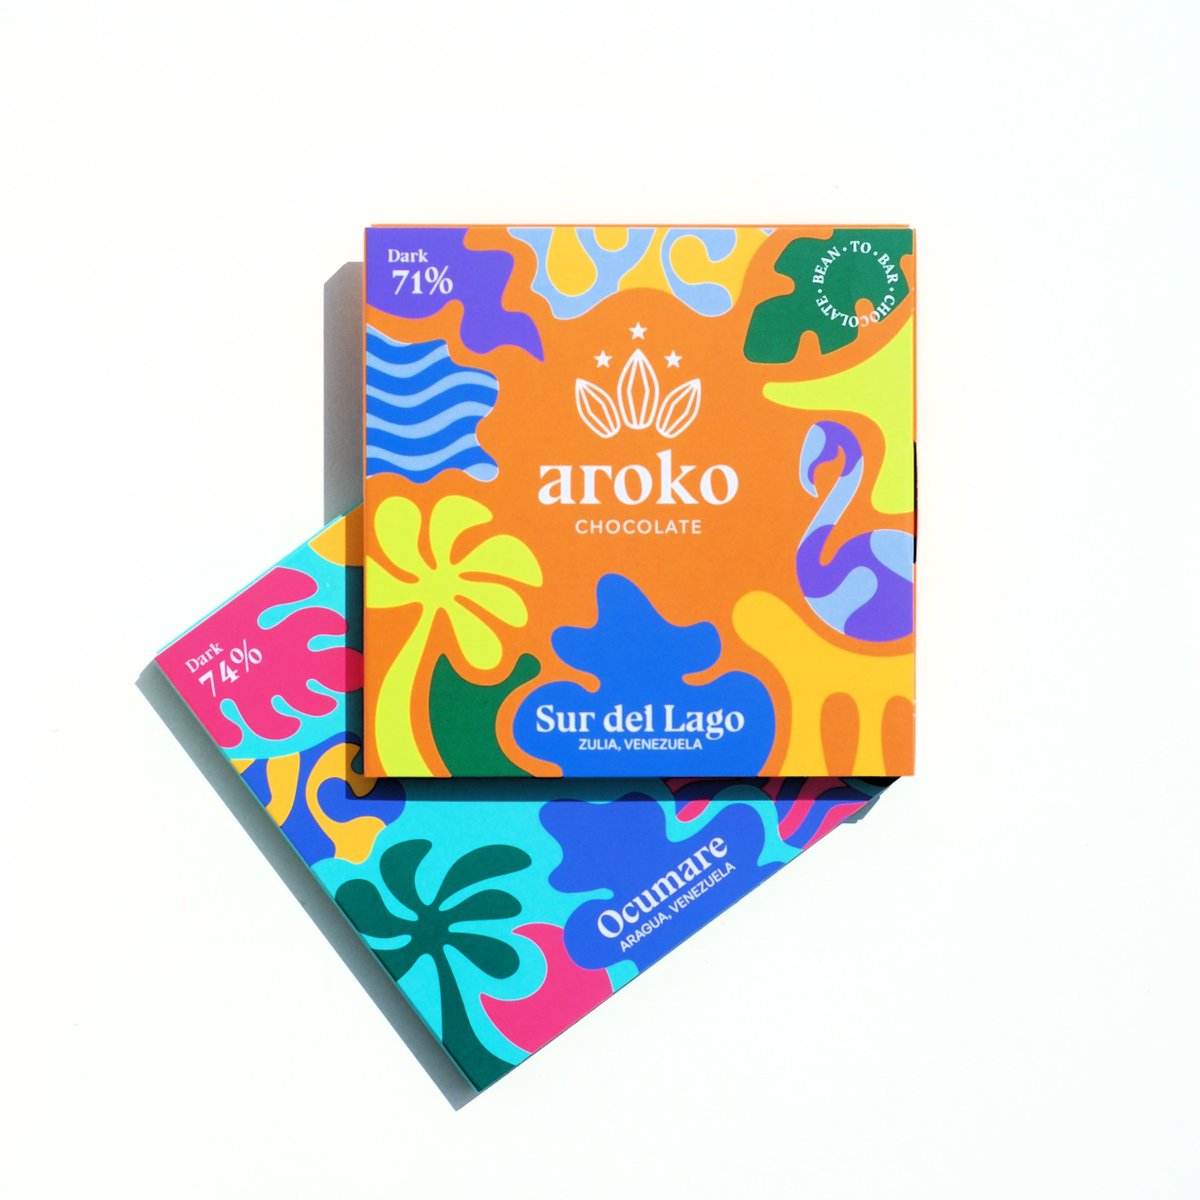 👀Discover new bars from Aroko 🇻🇪

We're delighted to re-stock on Aroko, and introduce two new bars from Dubraska and Johonny, a young Venezuelan couple now living in Italy

🆕Ocumare 74%
🆕Sur del Lago 71%
🔁Chuao 70%
🔁Porcelana 72%

#beantobar #craftchocolate #chocolatebars